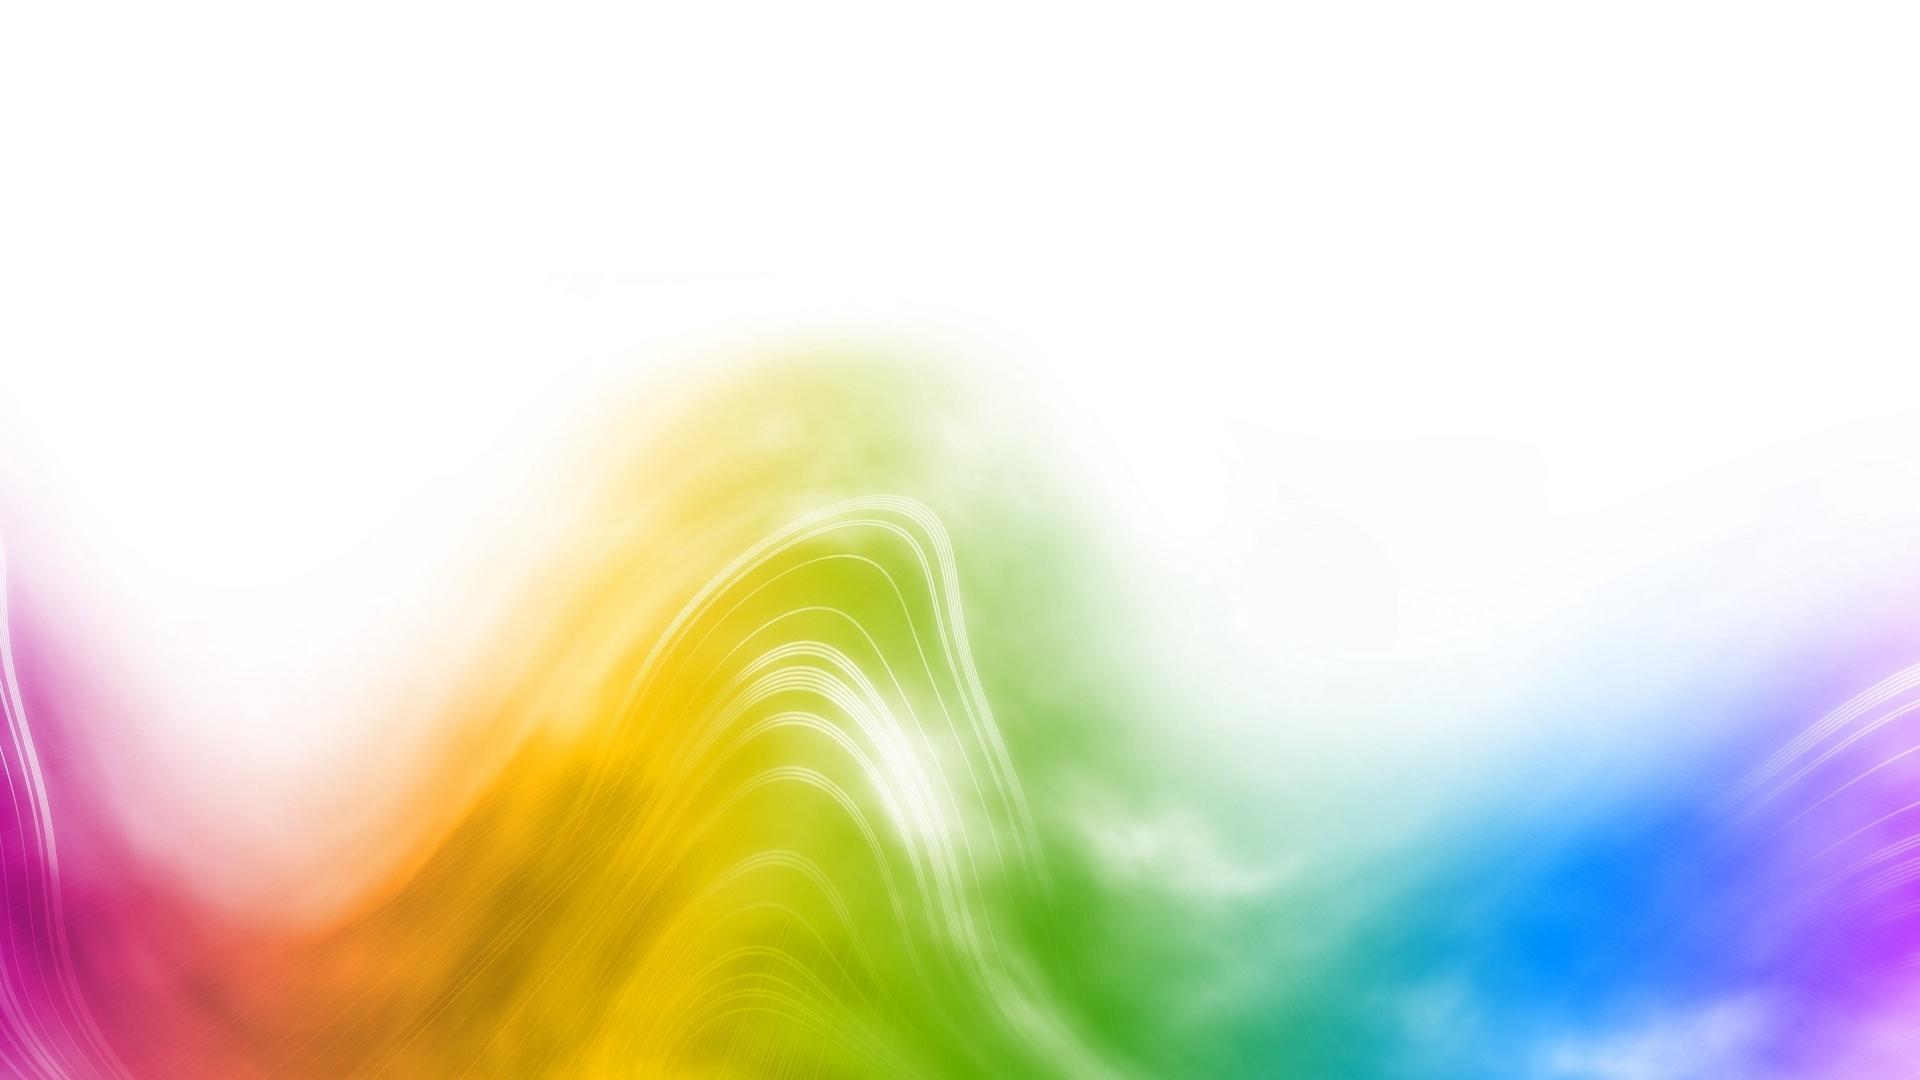 Download wallpaper 1920x1080 lines, wavy, colorful, abstract full HD